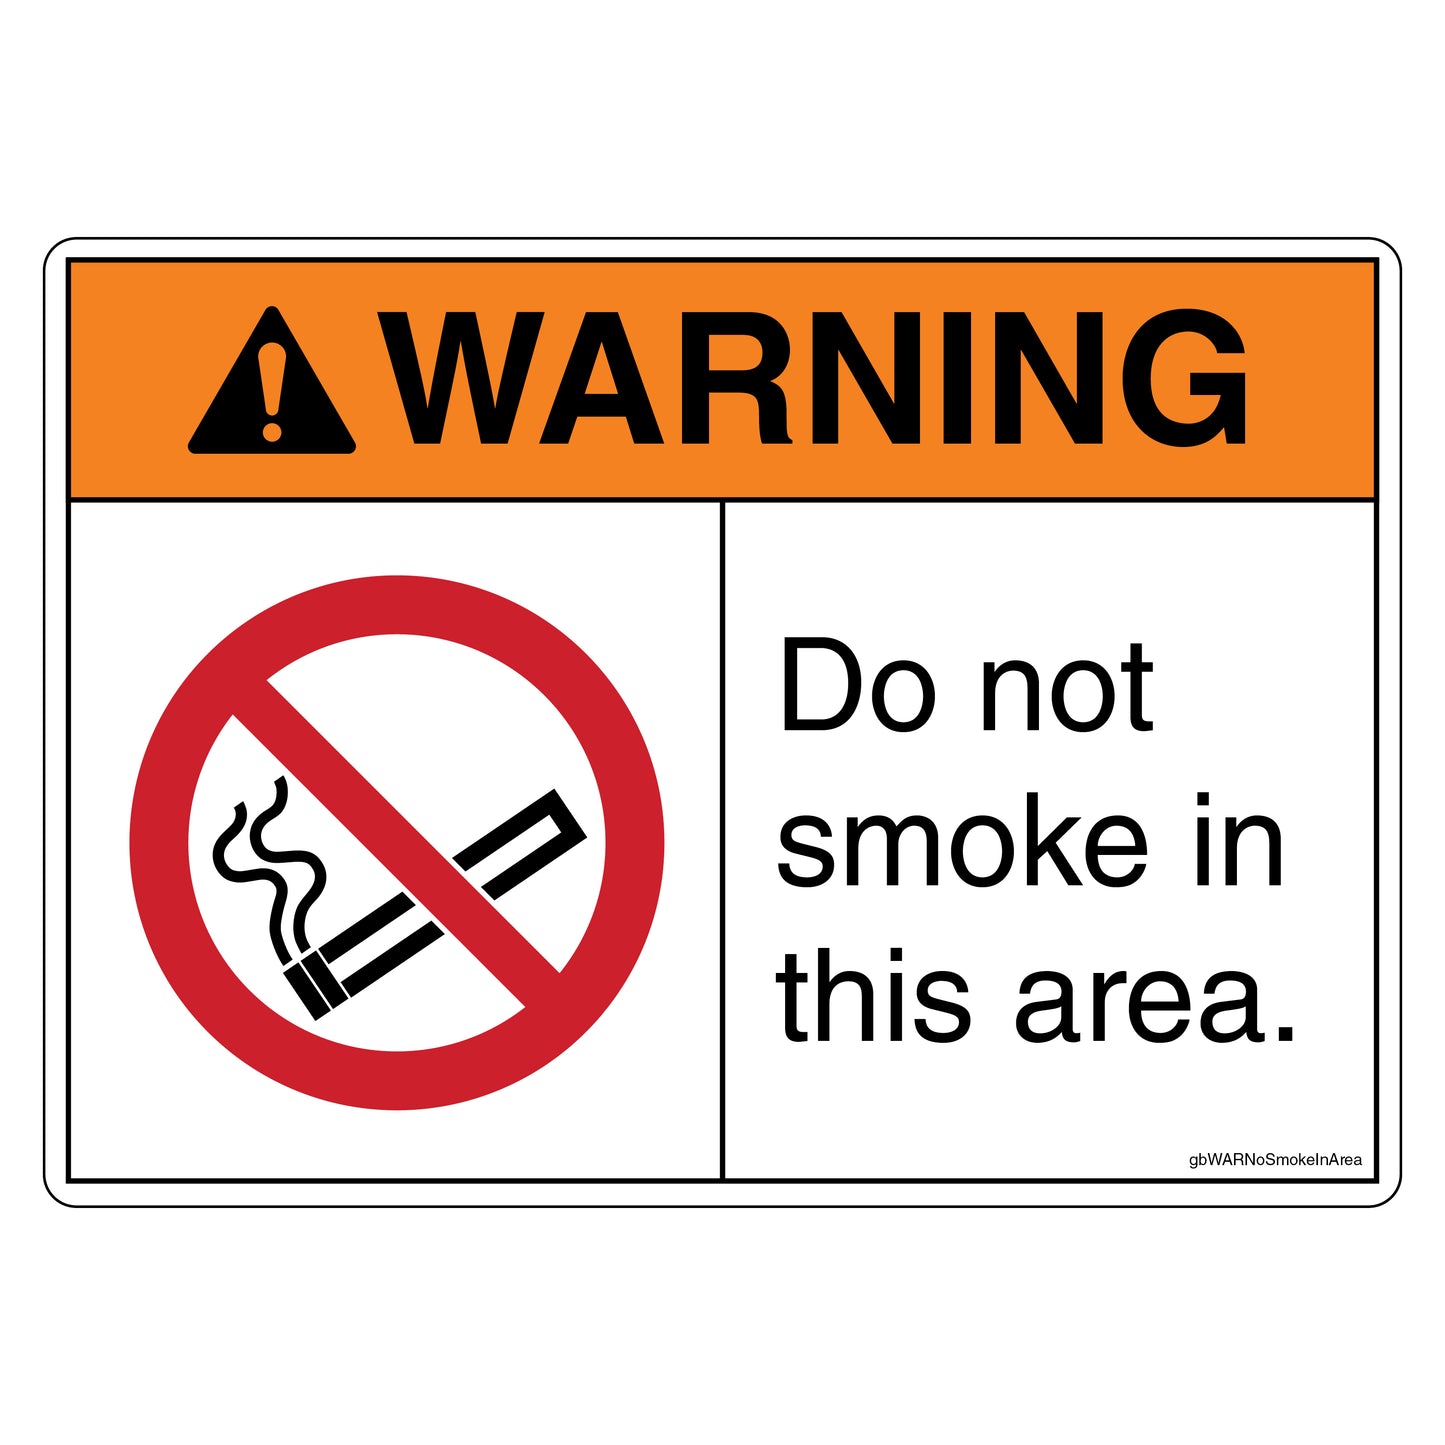 Warning Do Not Smoke in This Area Decal. 4 inches by 3 inches in size.